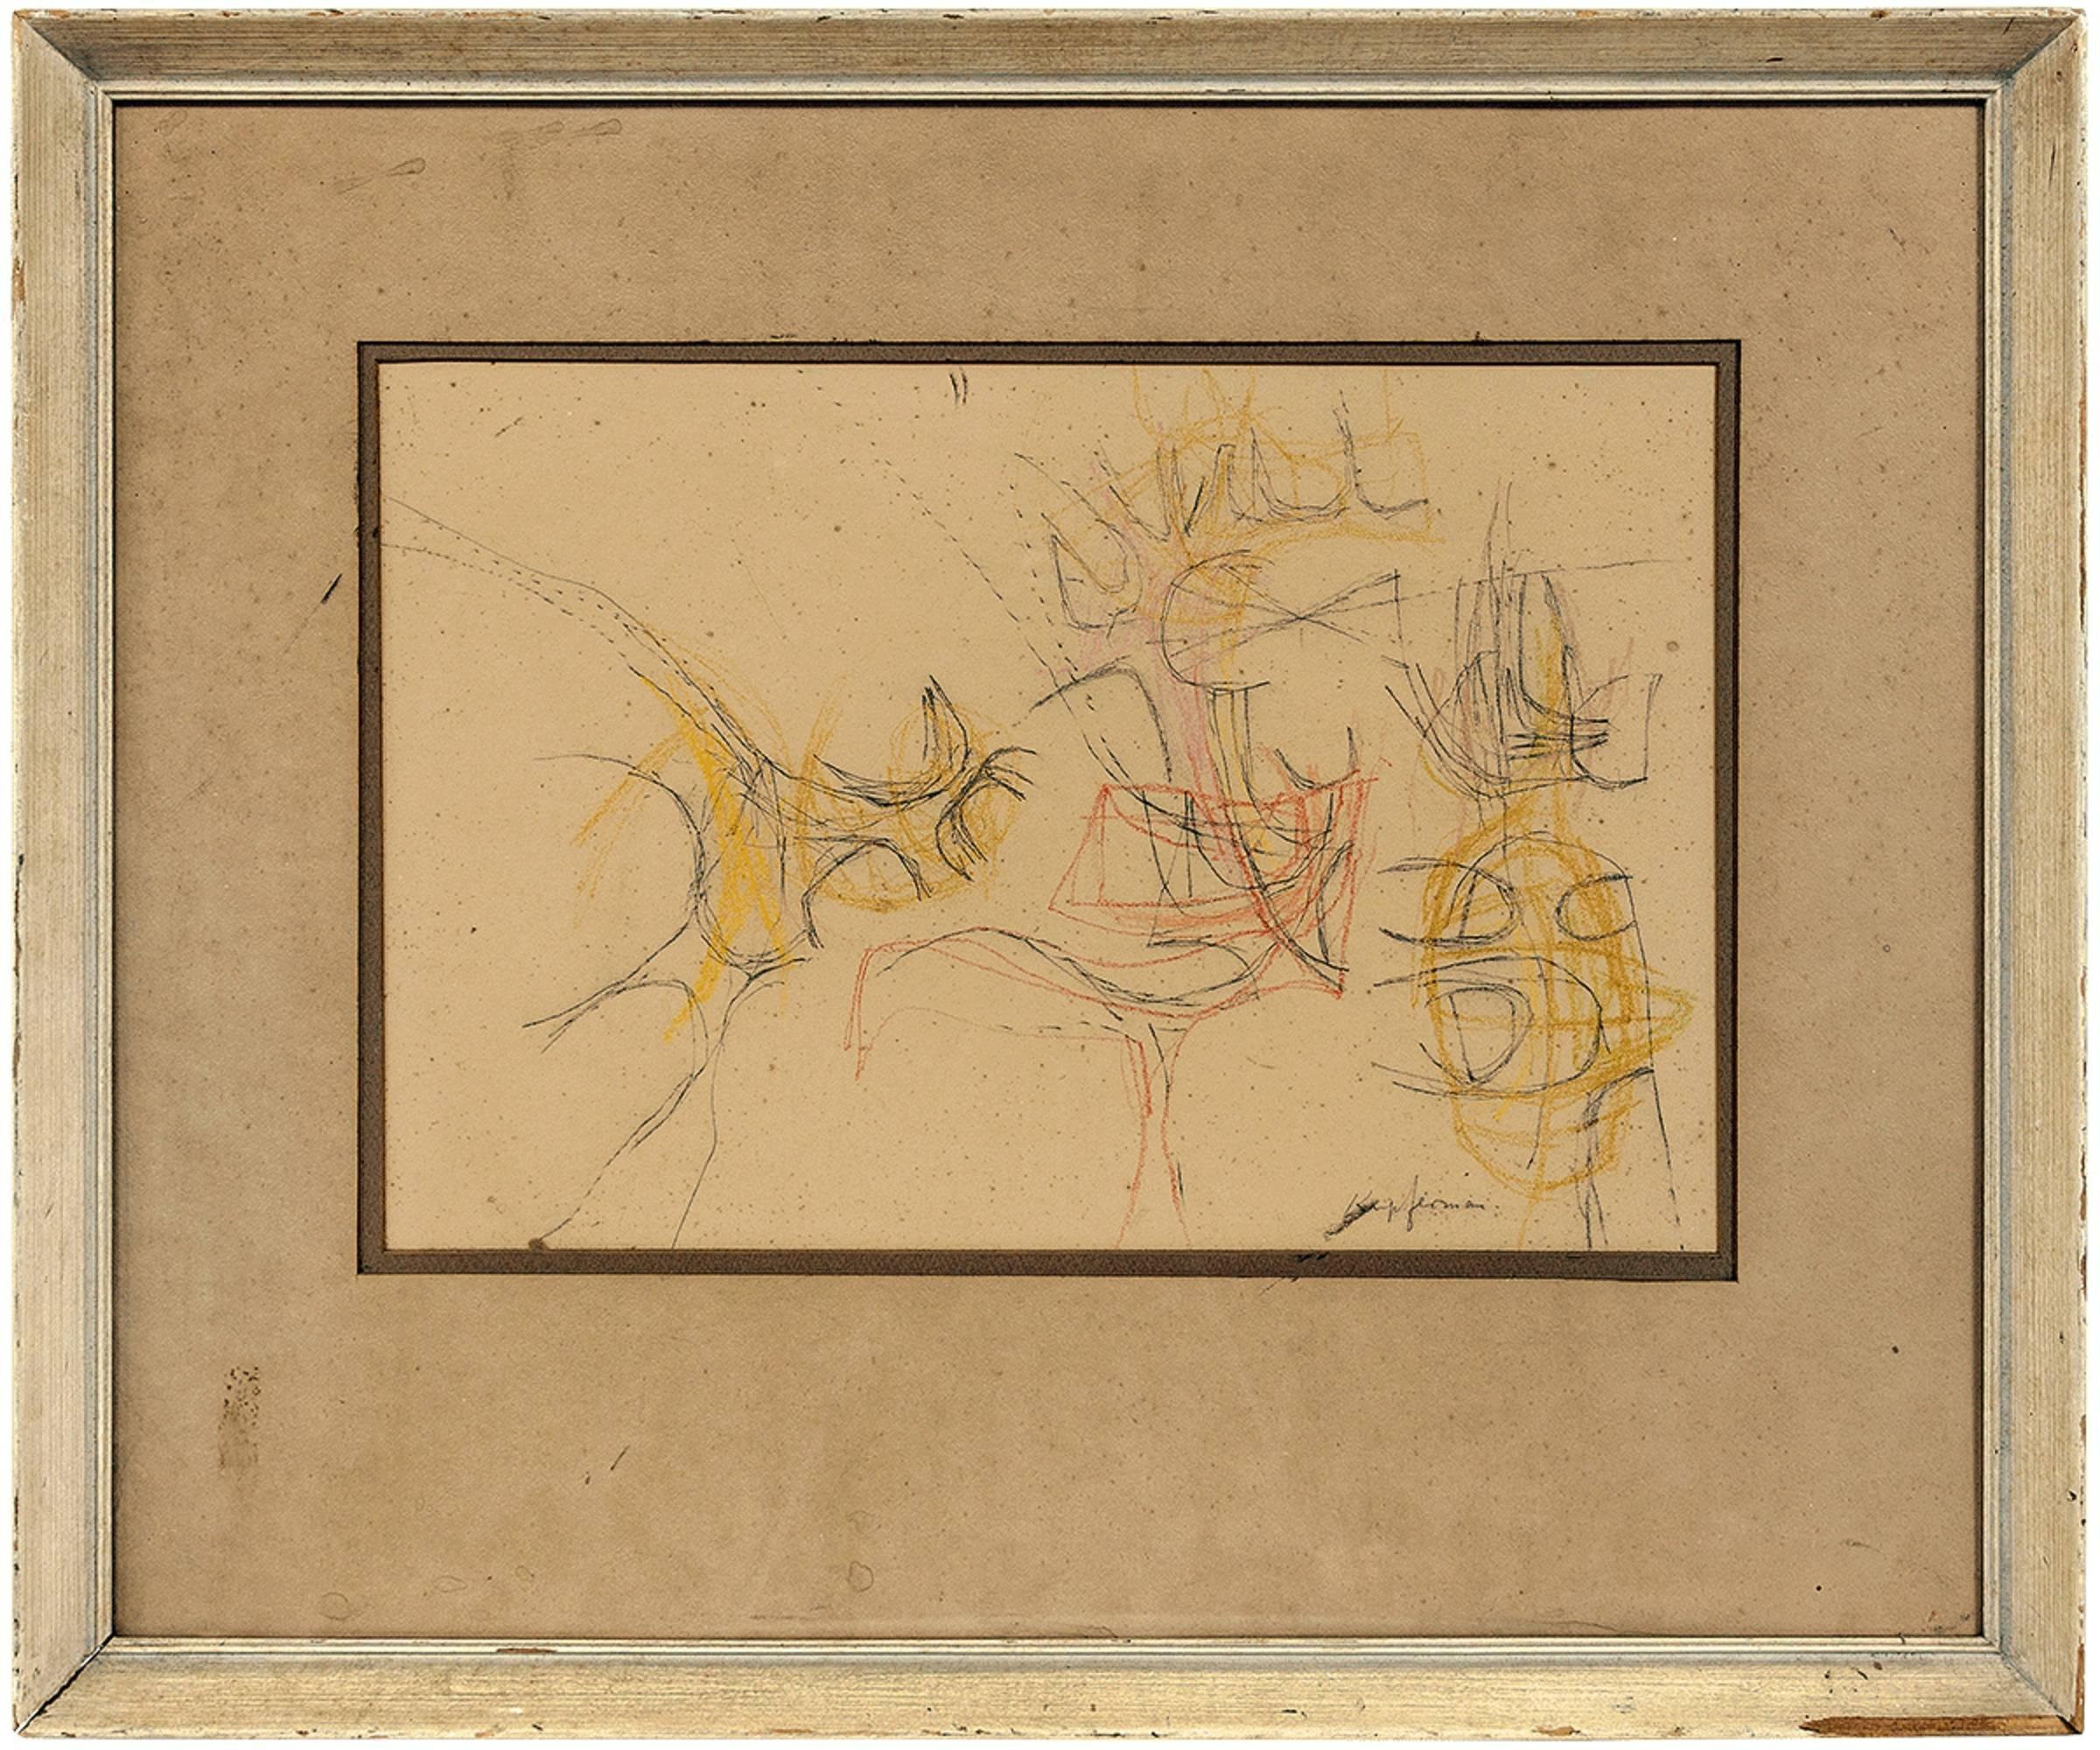 Lawrence Kupferman Abstract Drawing - Fragments of August